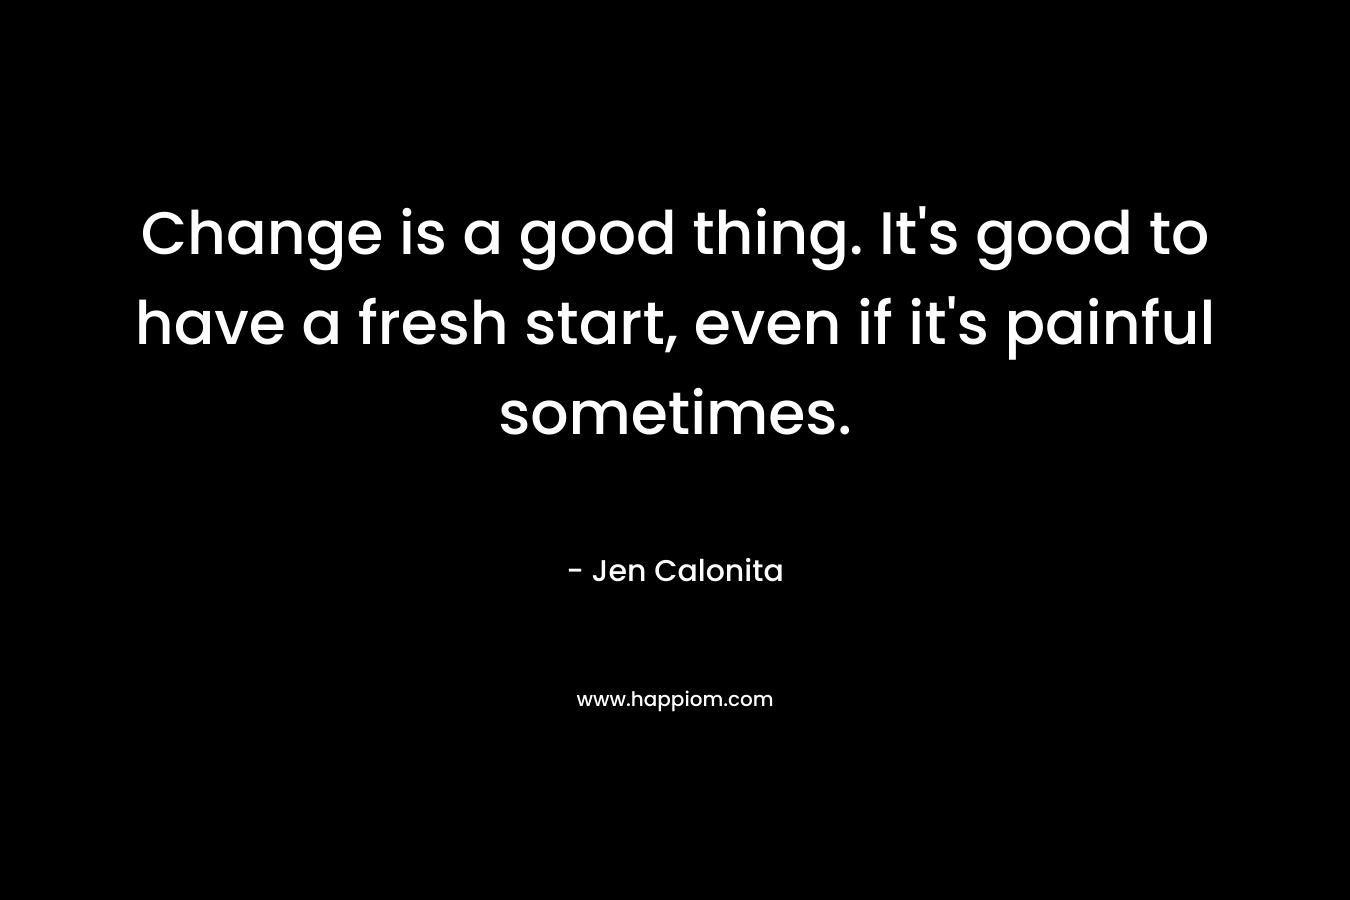 Change is a good thing. It’s good to have a fresh start, even if it’s painful sometimes. – Jen Calonita